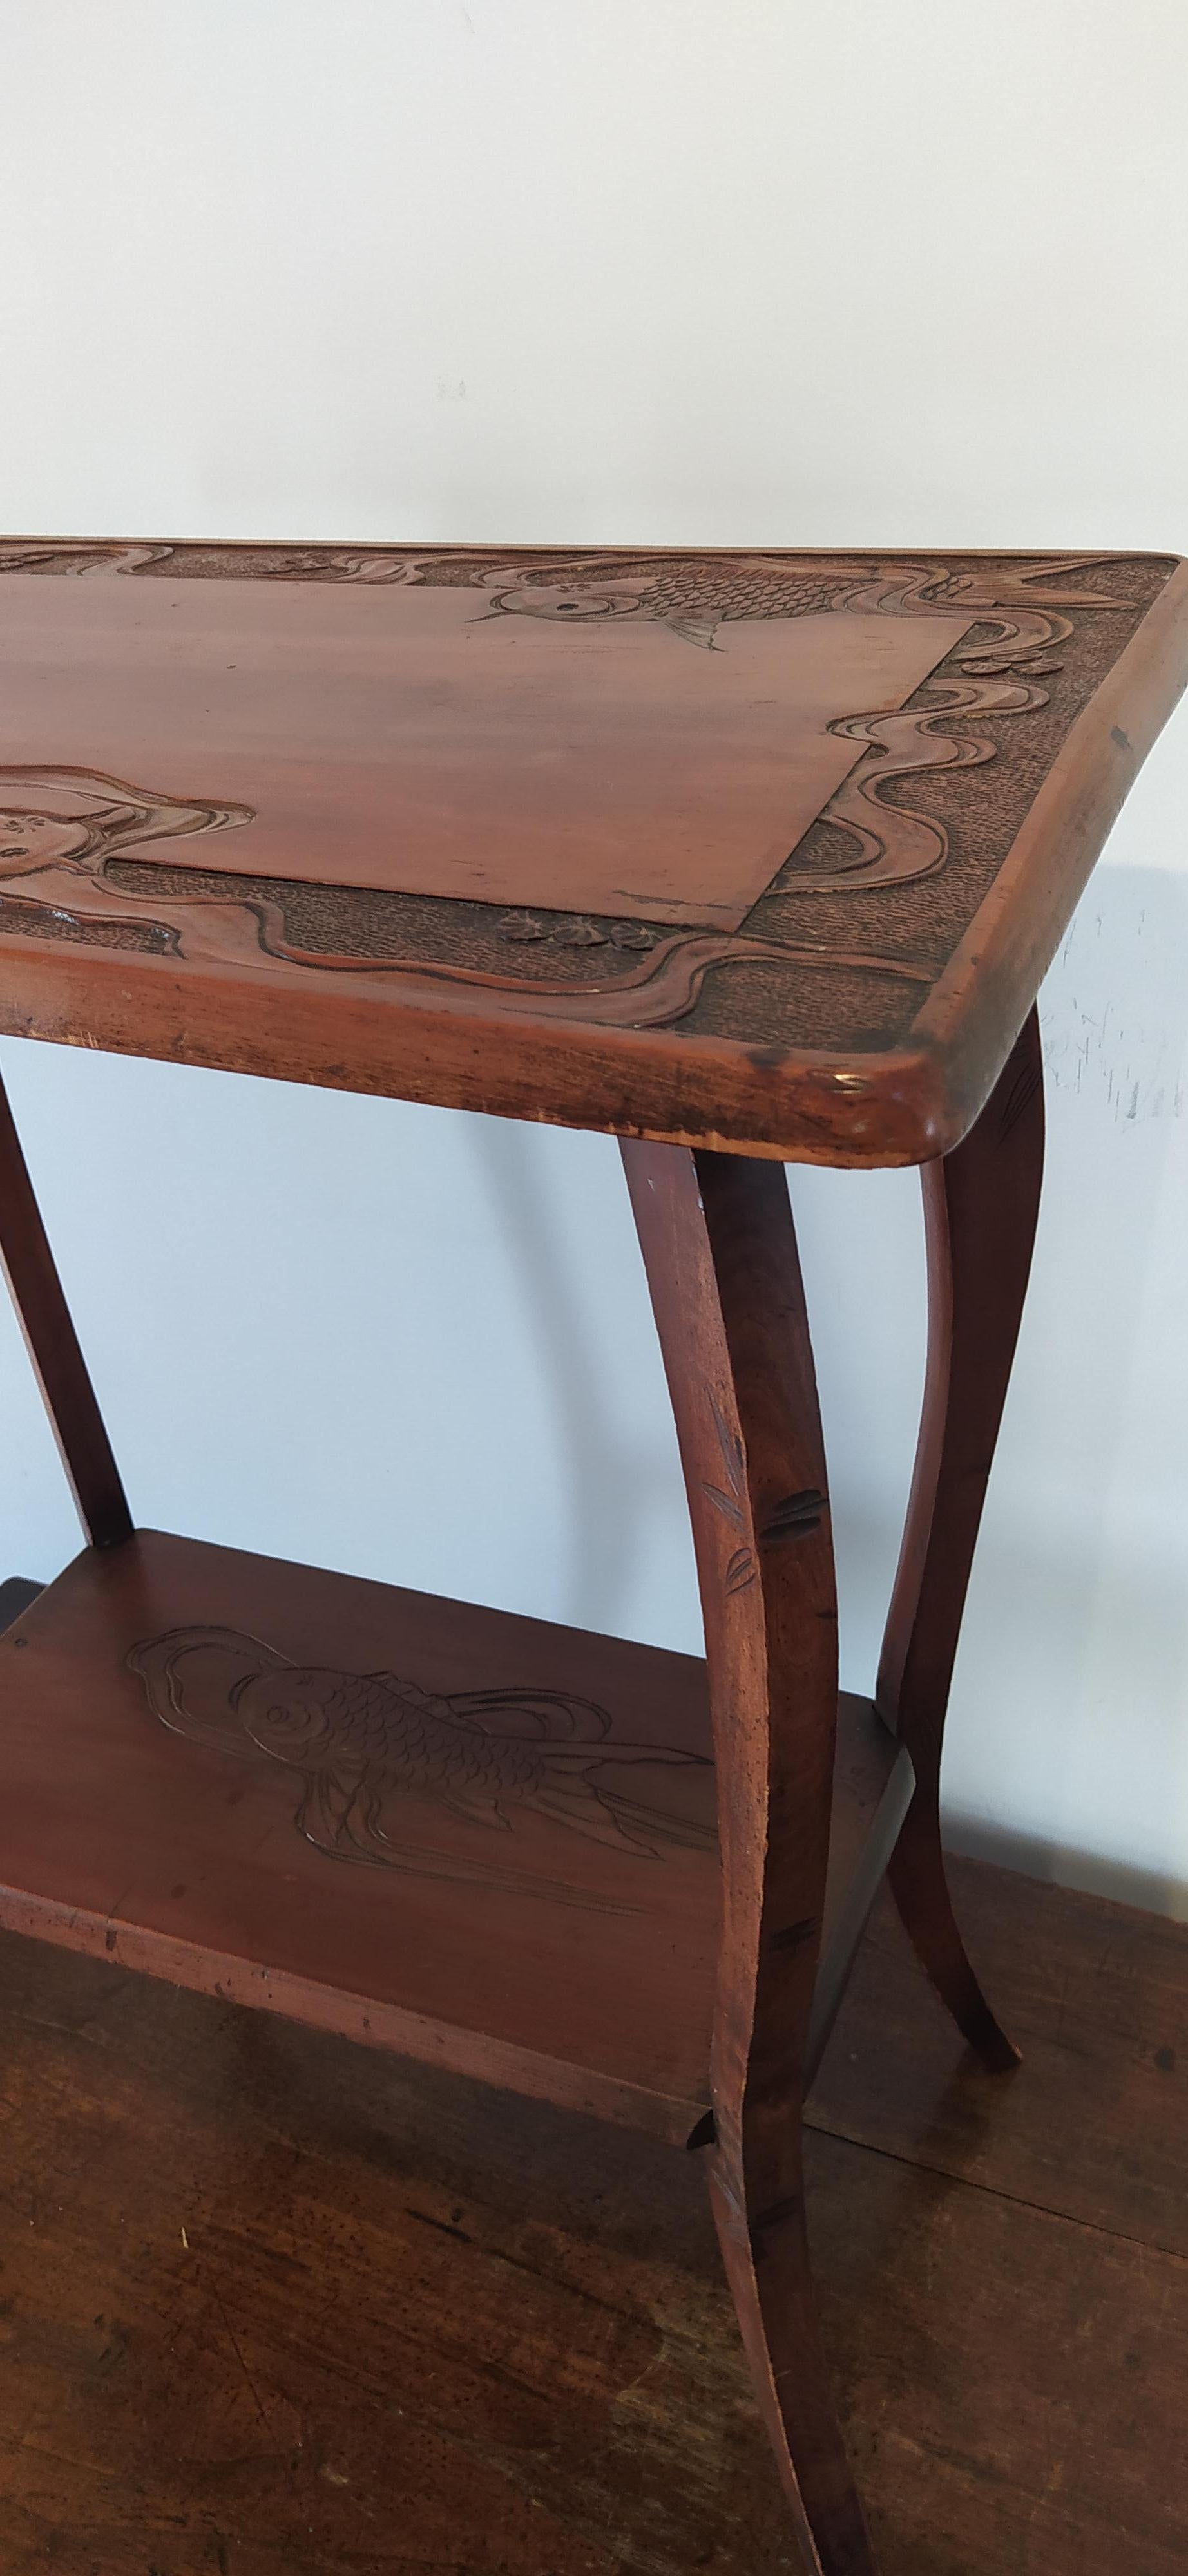 Wool Arts & Crafts Liberty & Co Japanese Side Table, Carved Koi Carp, circa 1900